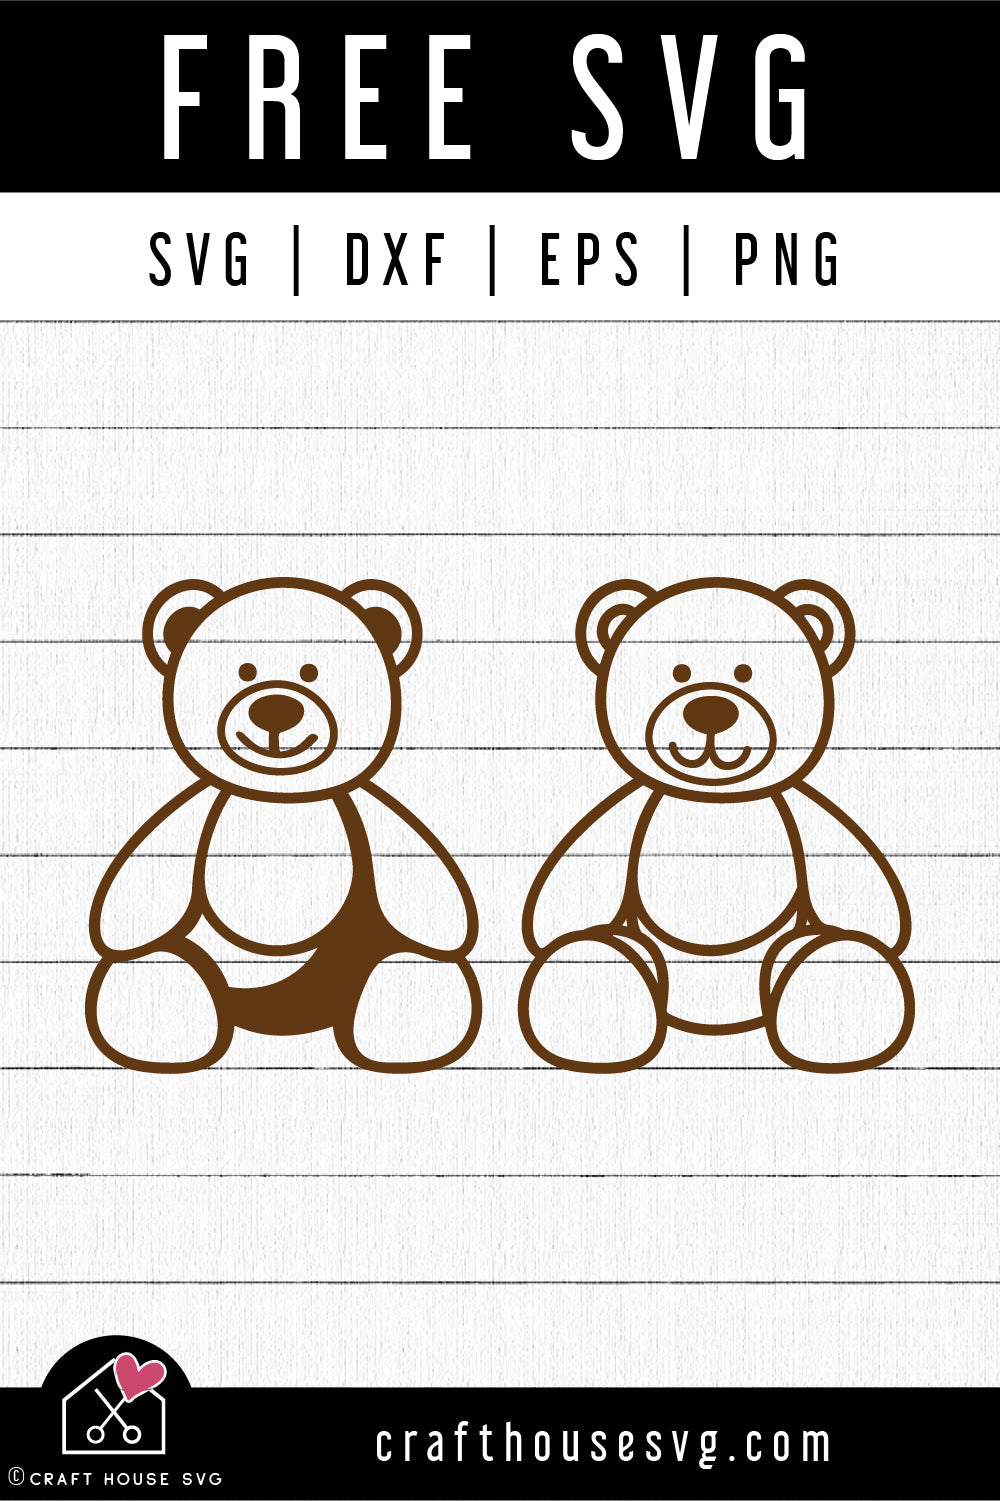 Teddy Bear SVG File: Instant Download for Cricut, Silhouette